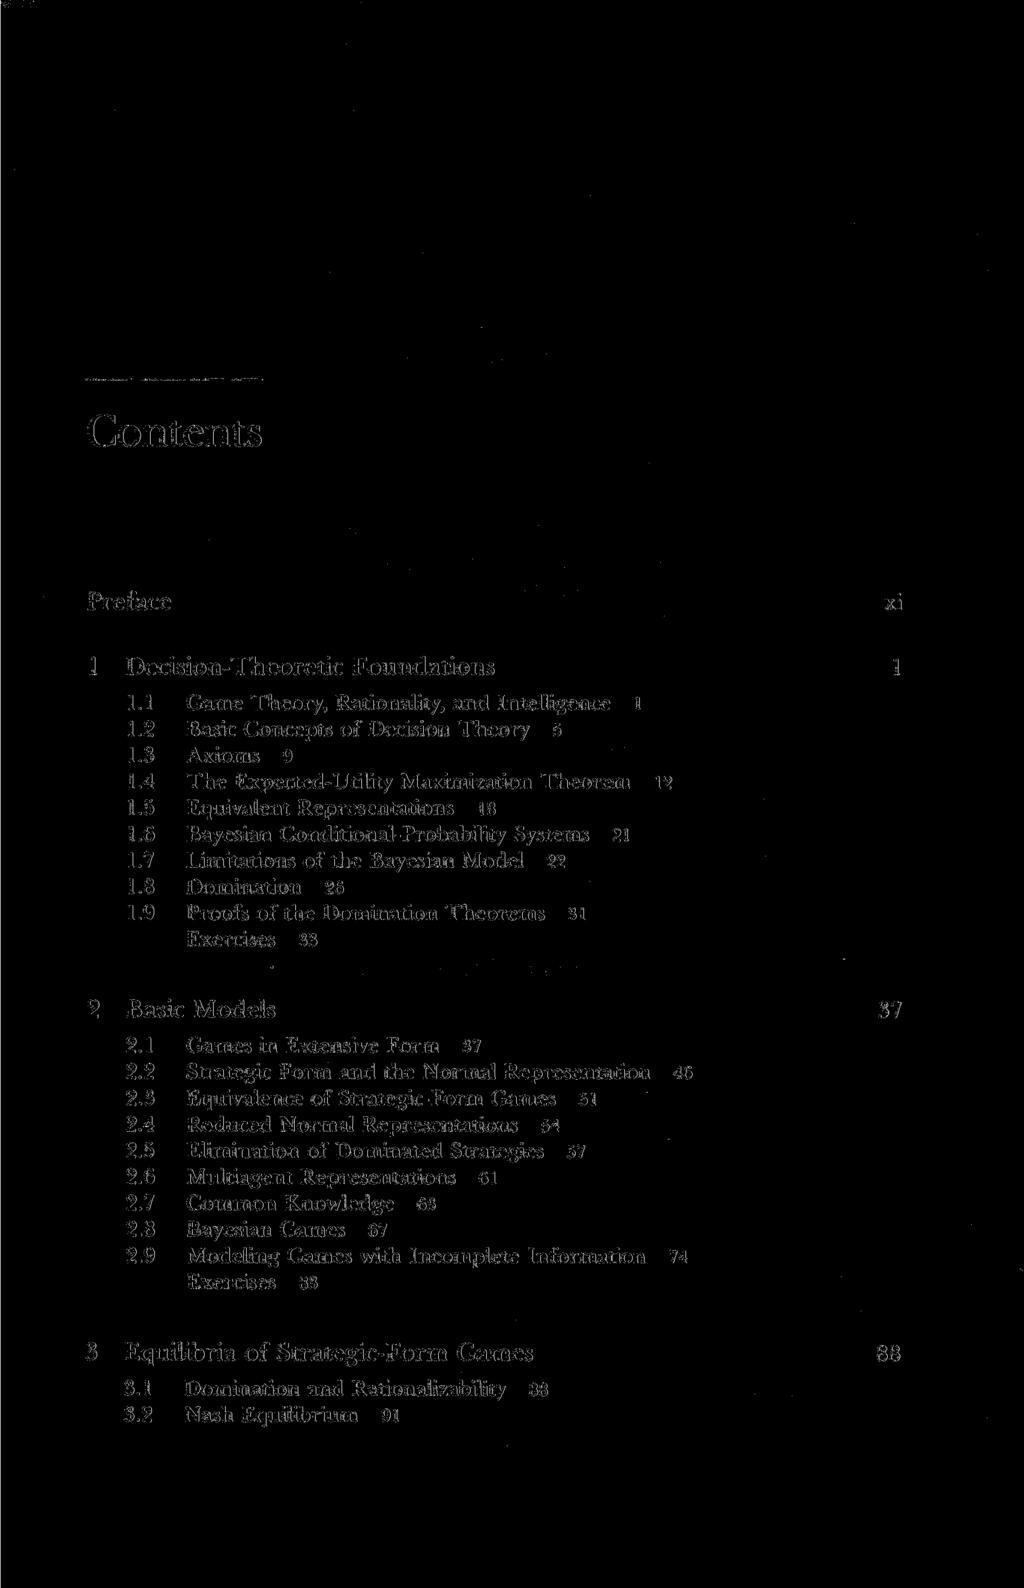 Contents Preface 1 Decision-Theoretic Foundations 1.1 Game Theory, Rationality, and Intelligence 1 1.2 Basic Concepts of Decision Theory 5 1.3 Axioms 9 1.4 The Expected-Utility Maximization Theorem 1.